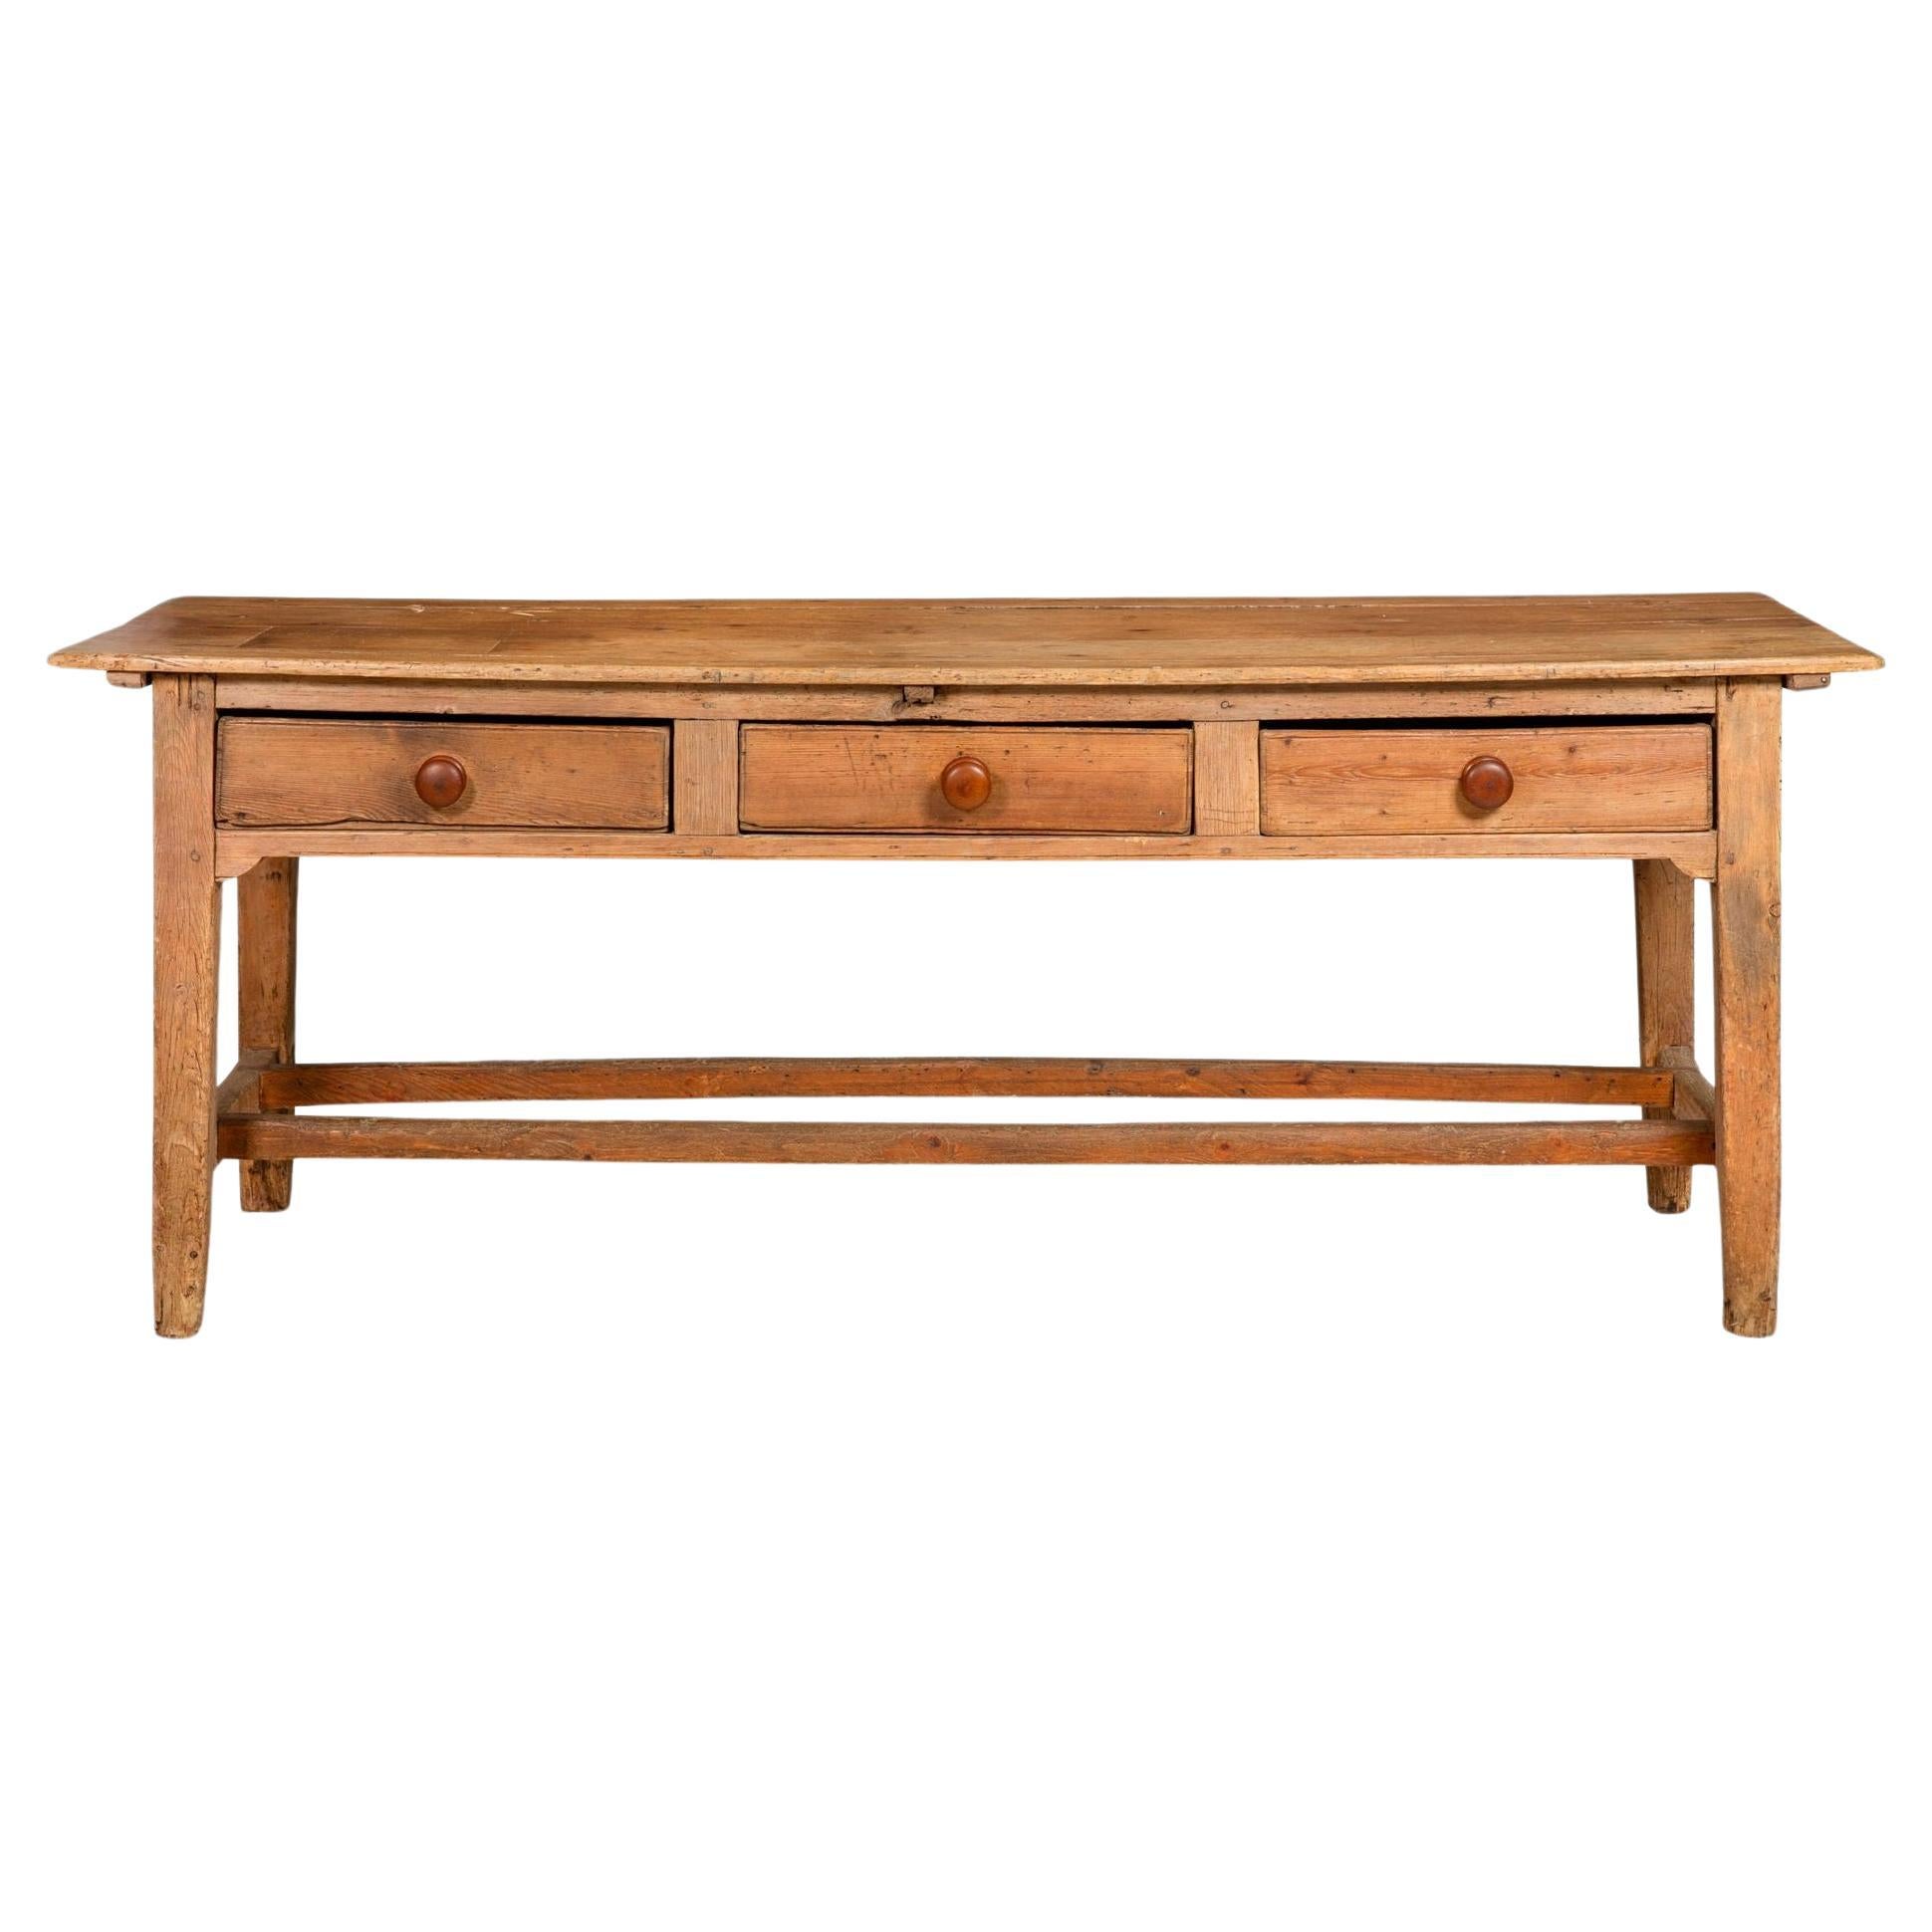 Worn and Patinated English Antique Pine Tavern Table Desk For Sale